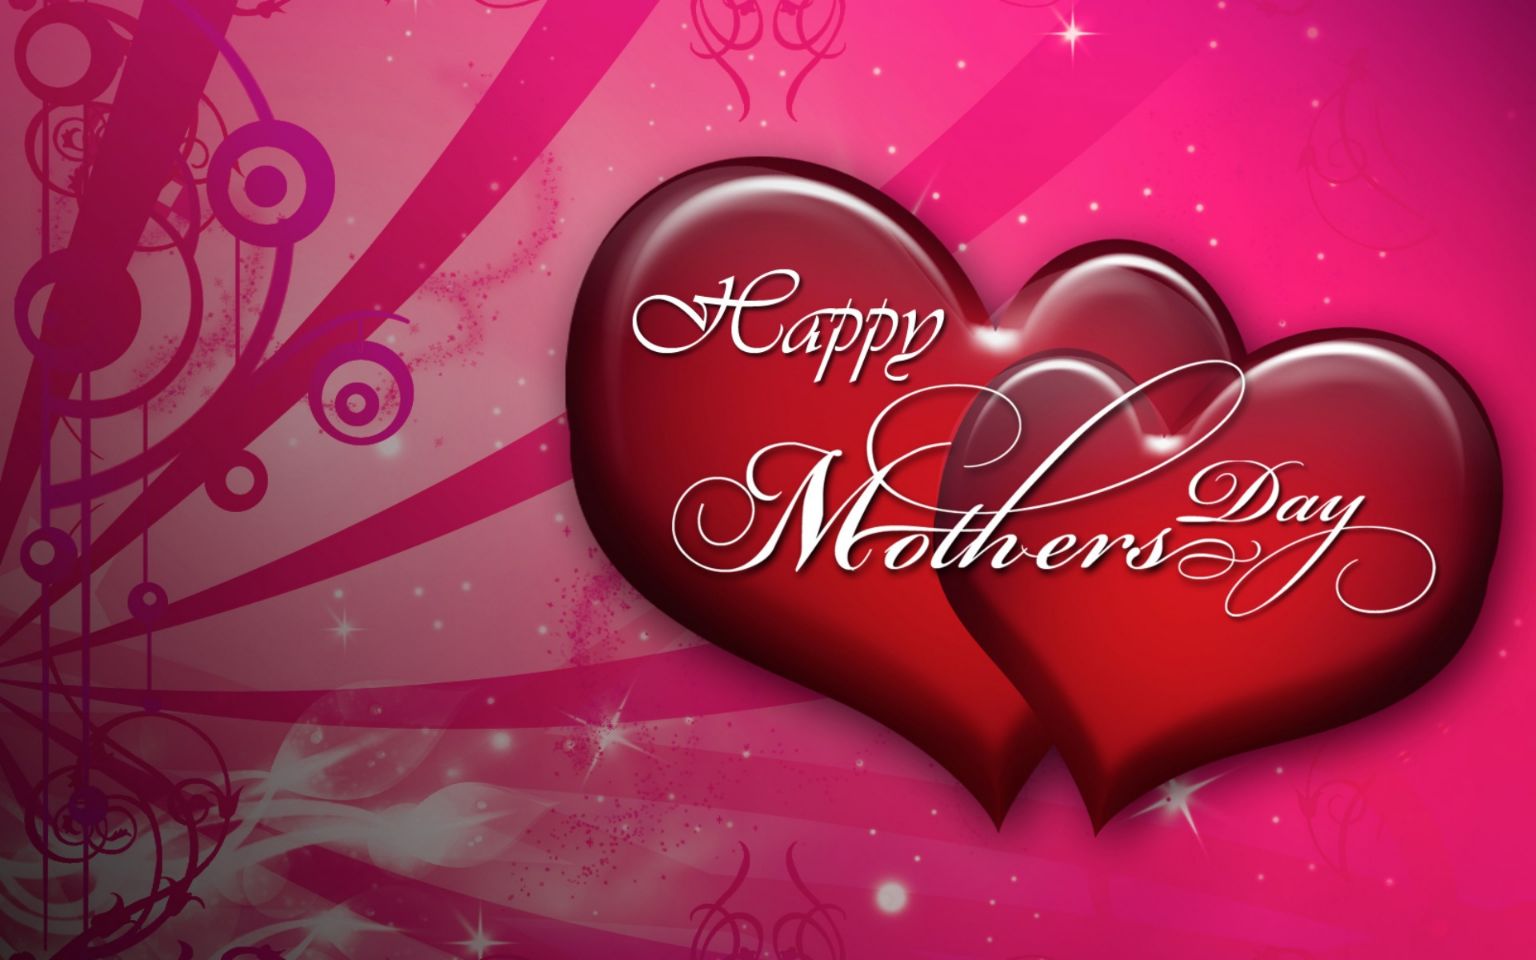 15 Best Mothers Day Pictures, Image, Greetings, Photos, Clipart